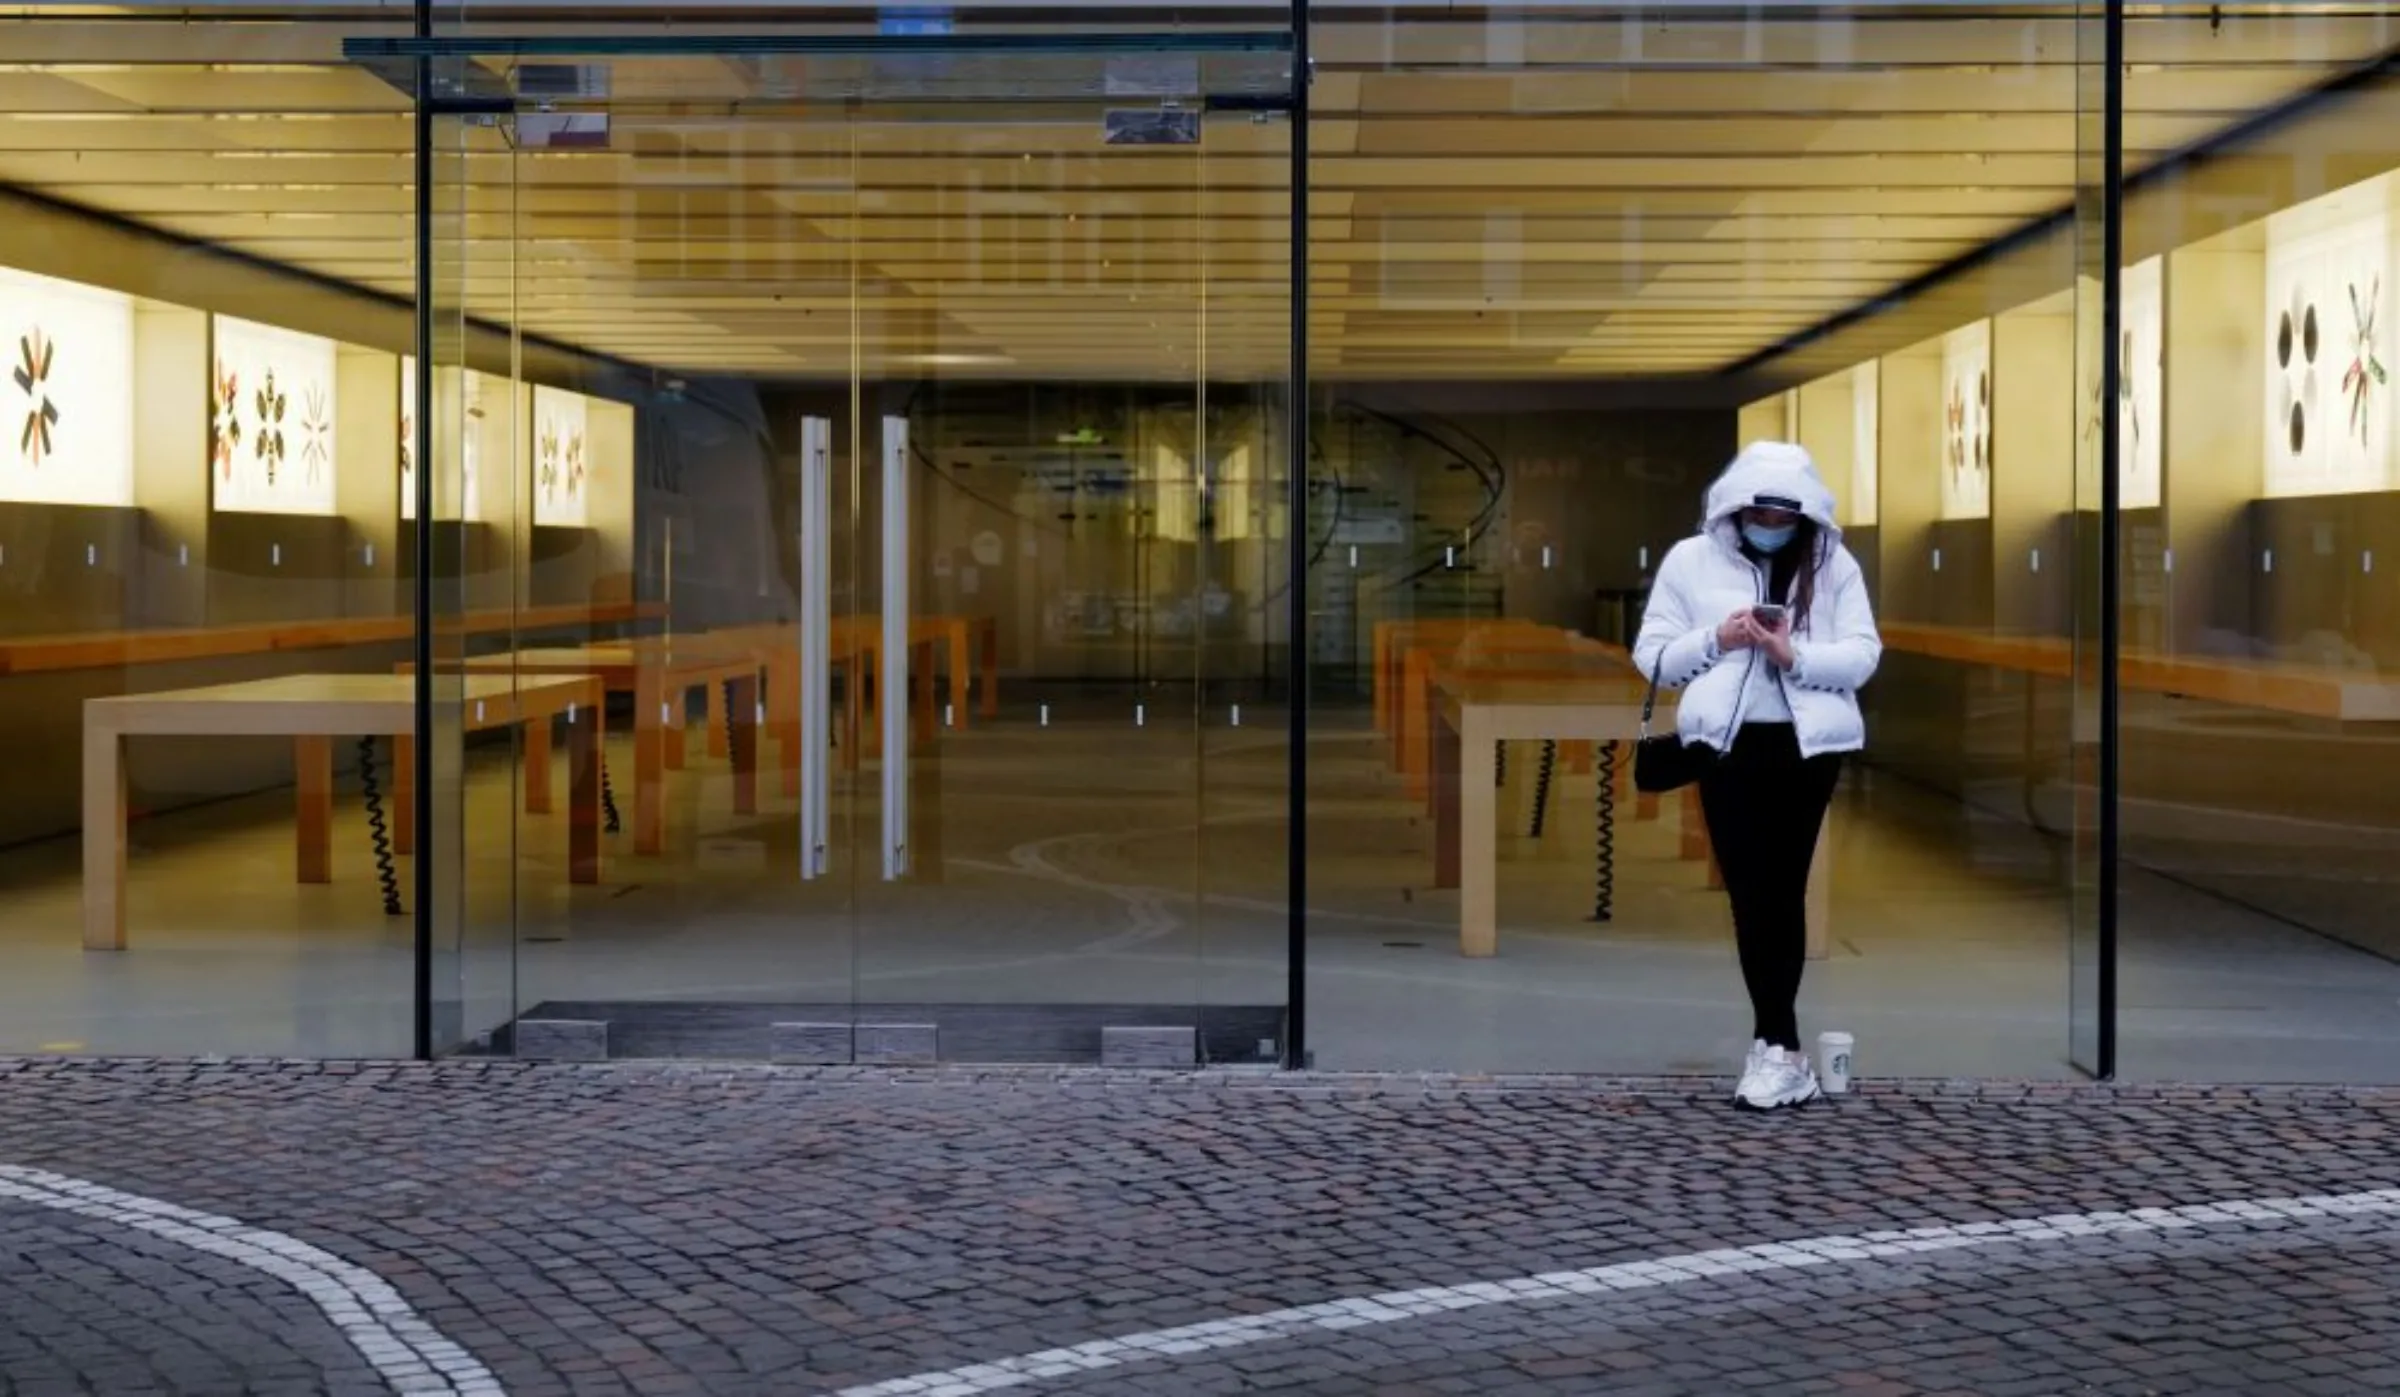 A girl checks her mobile phone as she stands in front of an empty Apple store during an extended lockdown as the spread of the coronavirus disease (COVID-19) continues in Frankfurt, Germany, January 21, 2021. REUTERS/Kai Pfaffenbach